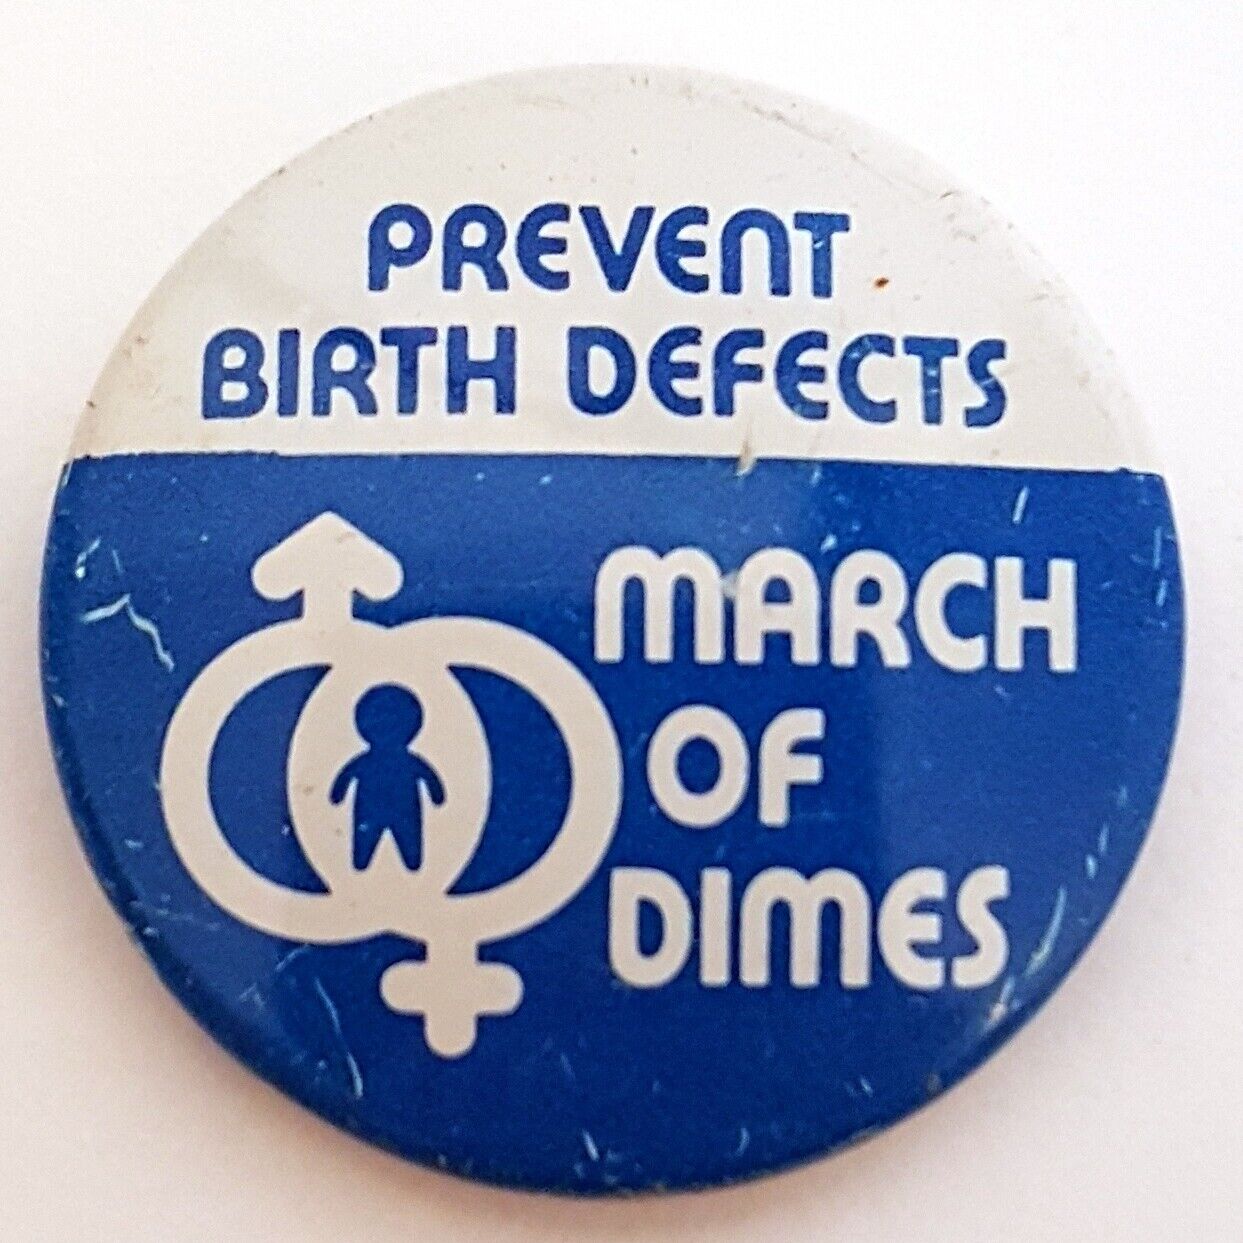 March of Dimes Prevent Birth Defects Vintage Button Pin 